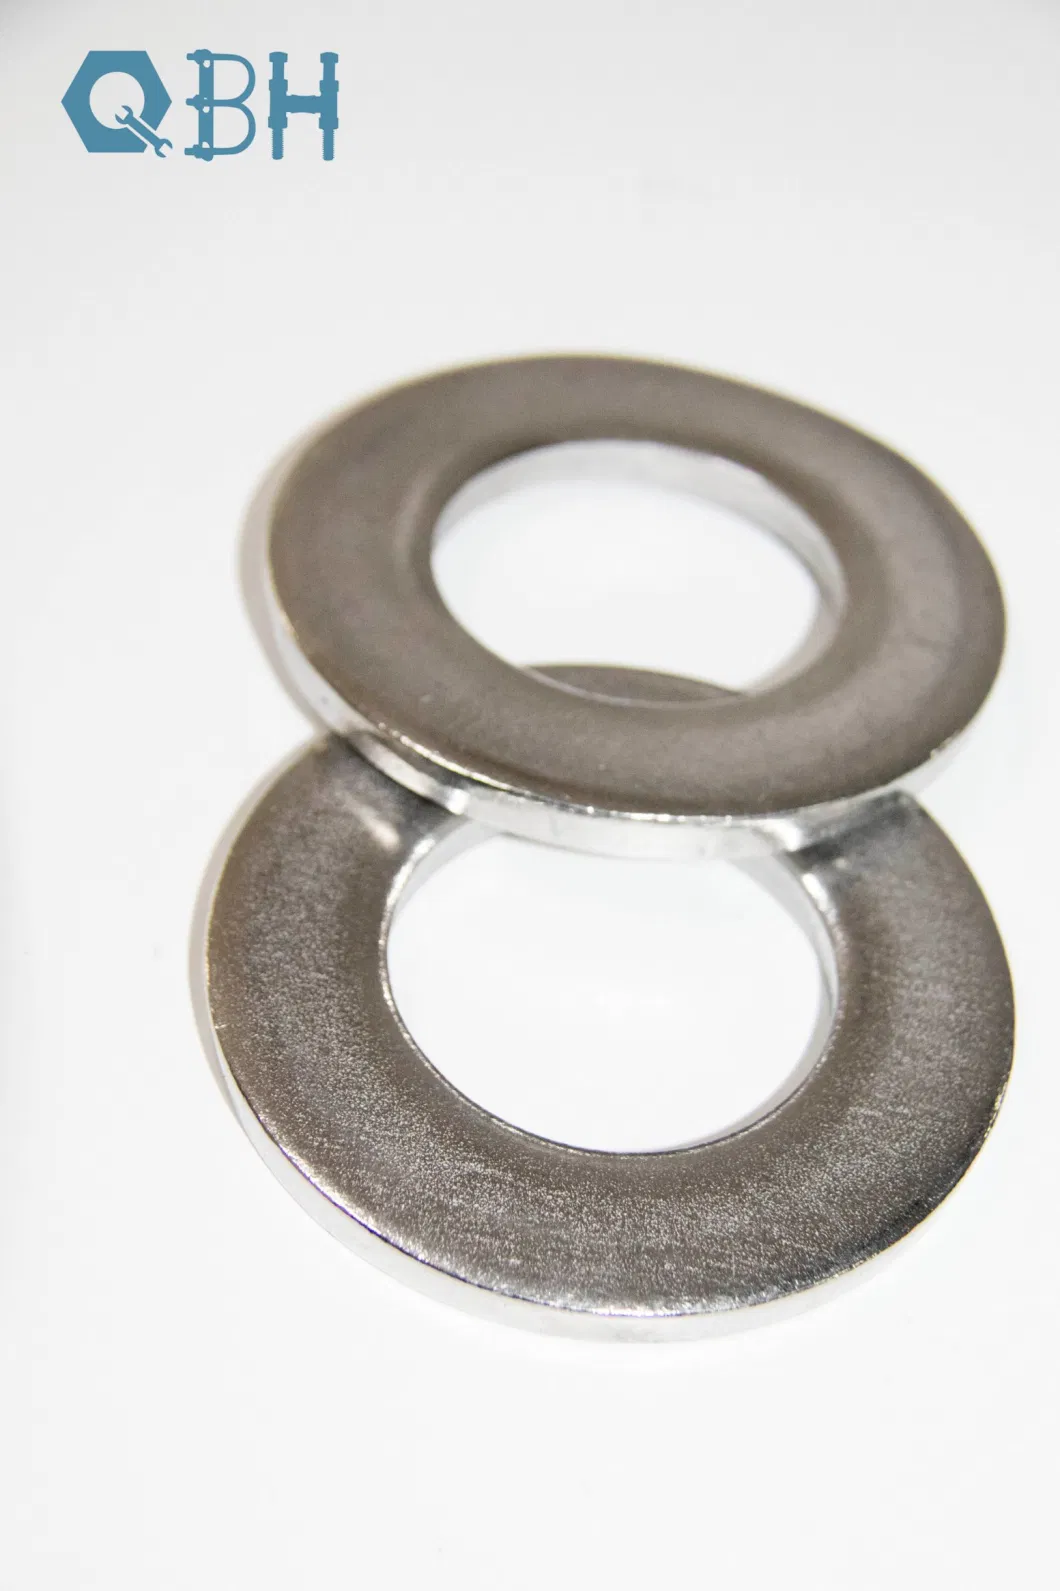 DIN 125 Washer Stainless Steel 316 High Quality Flat Washers